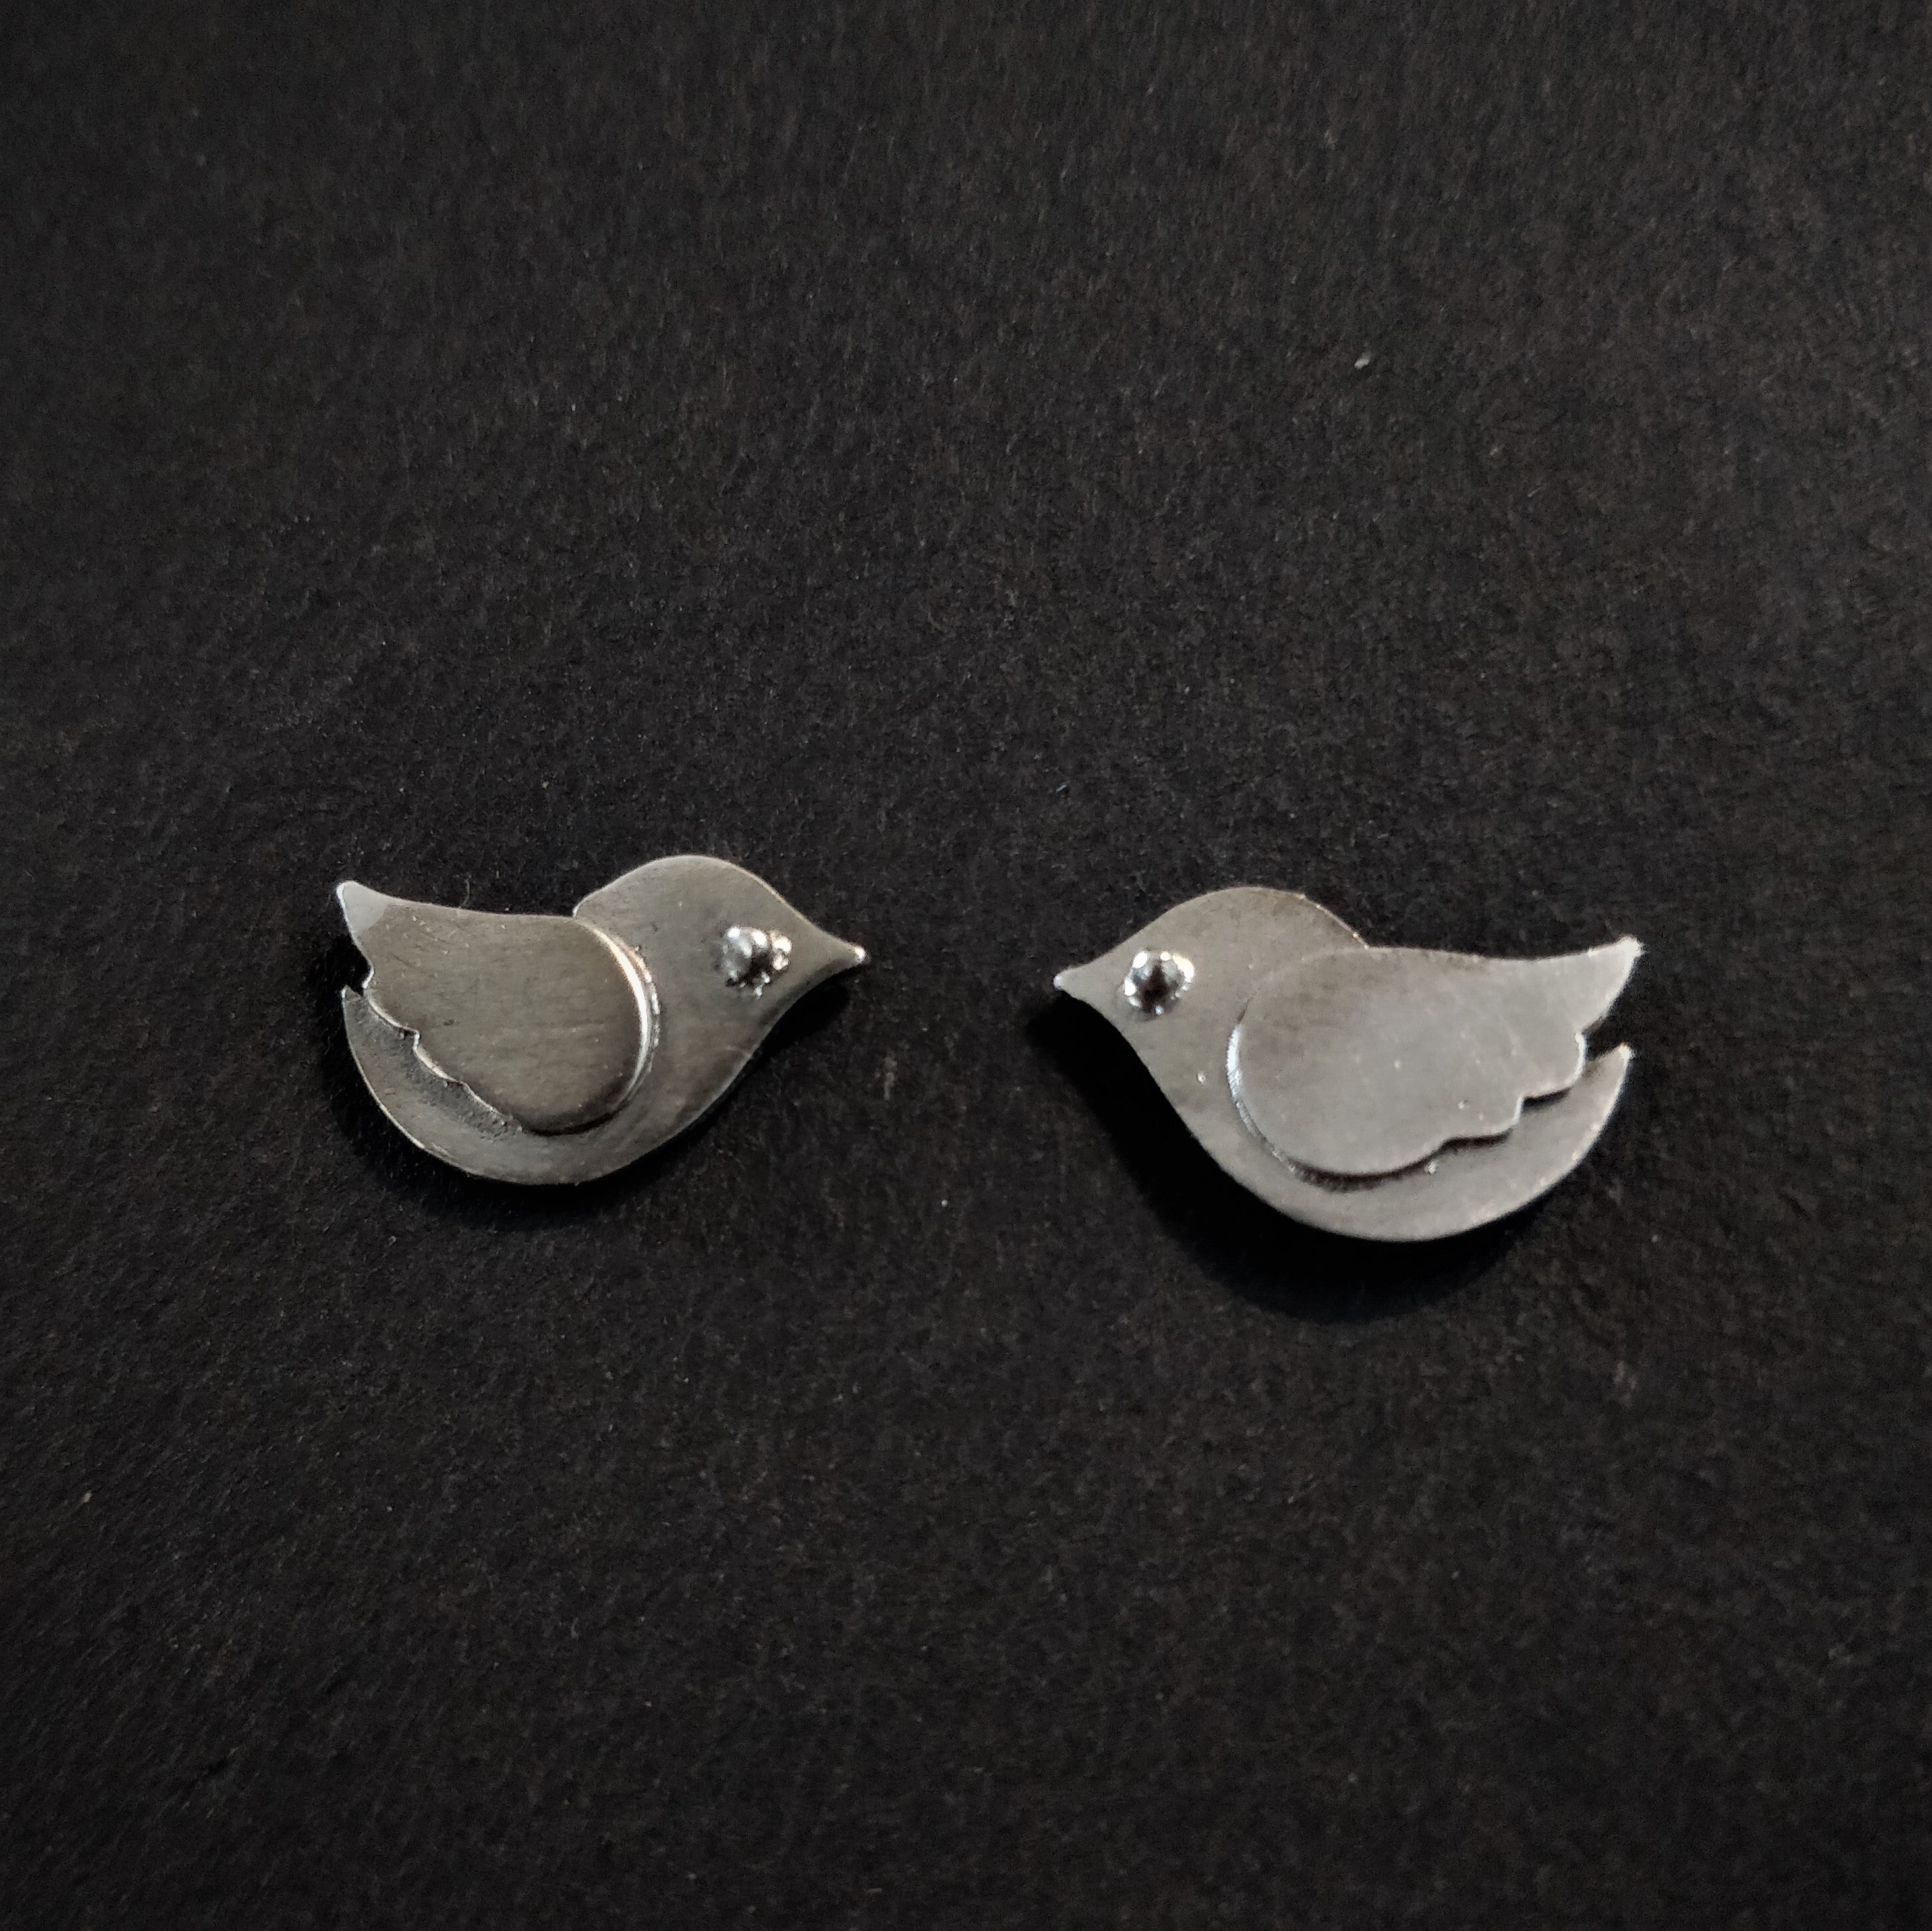 Shop for silver stud Earrings Online - Quirksmith